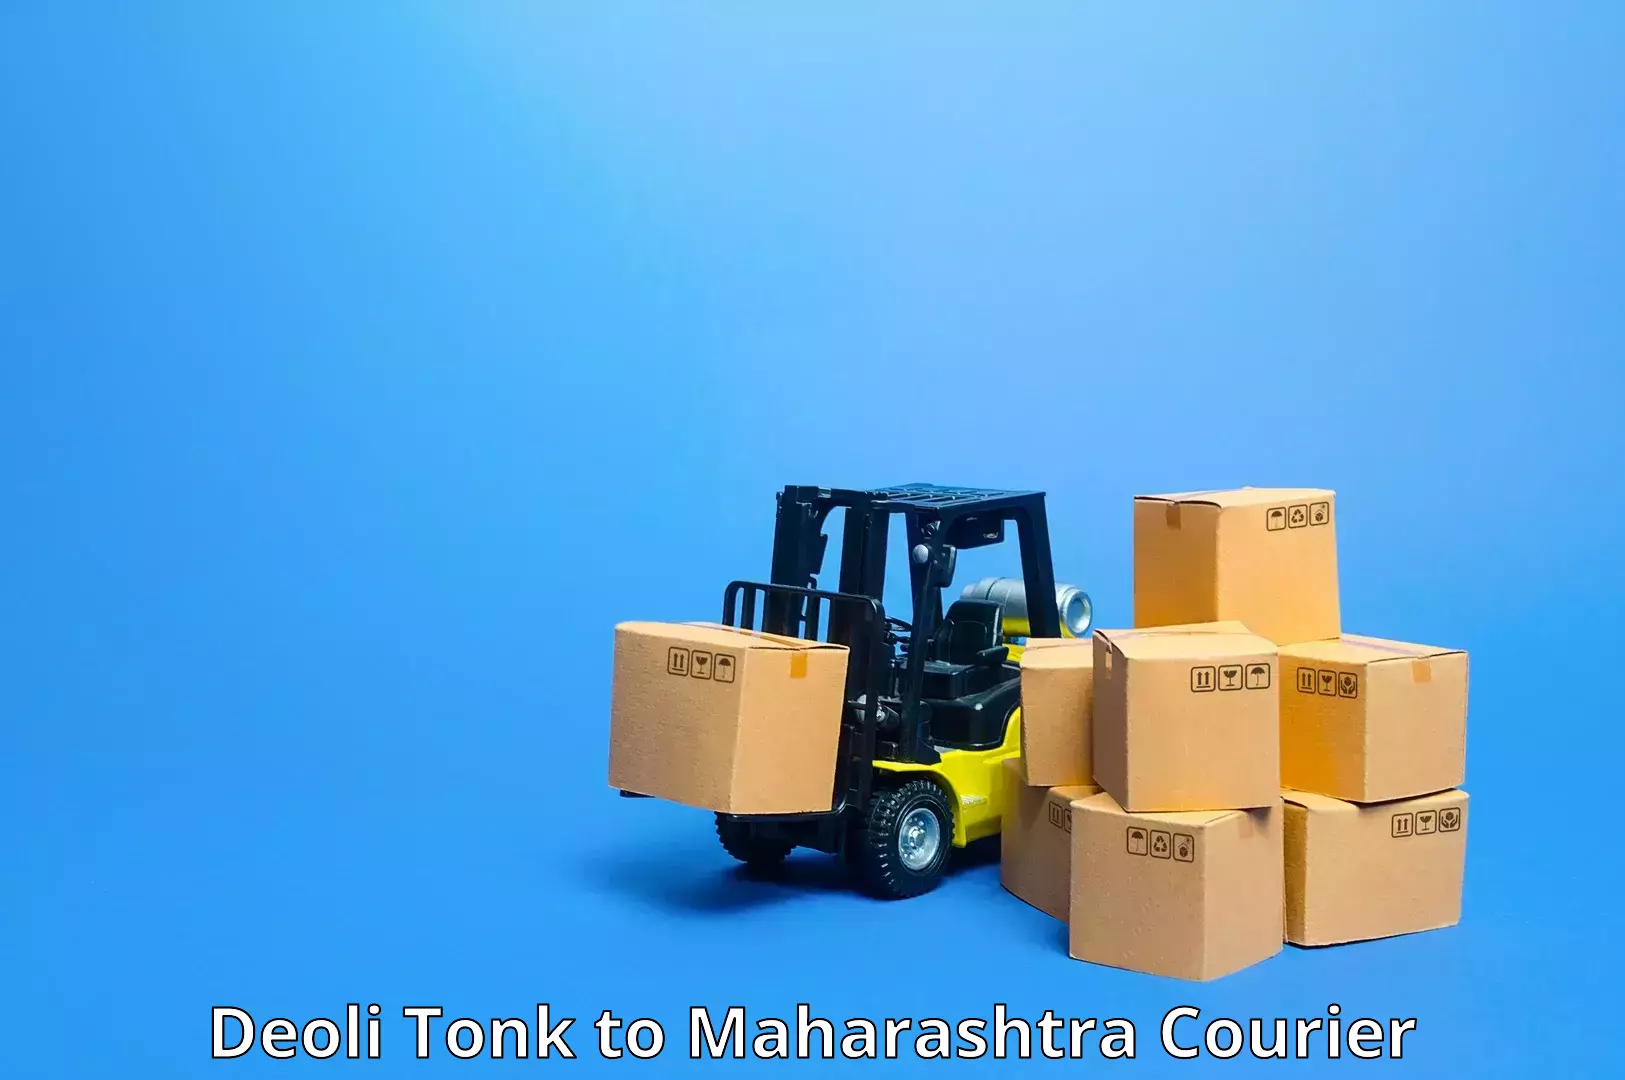 Reliable courier services Deoli Tonk to Barshi